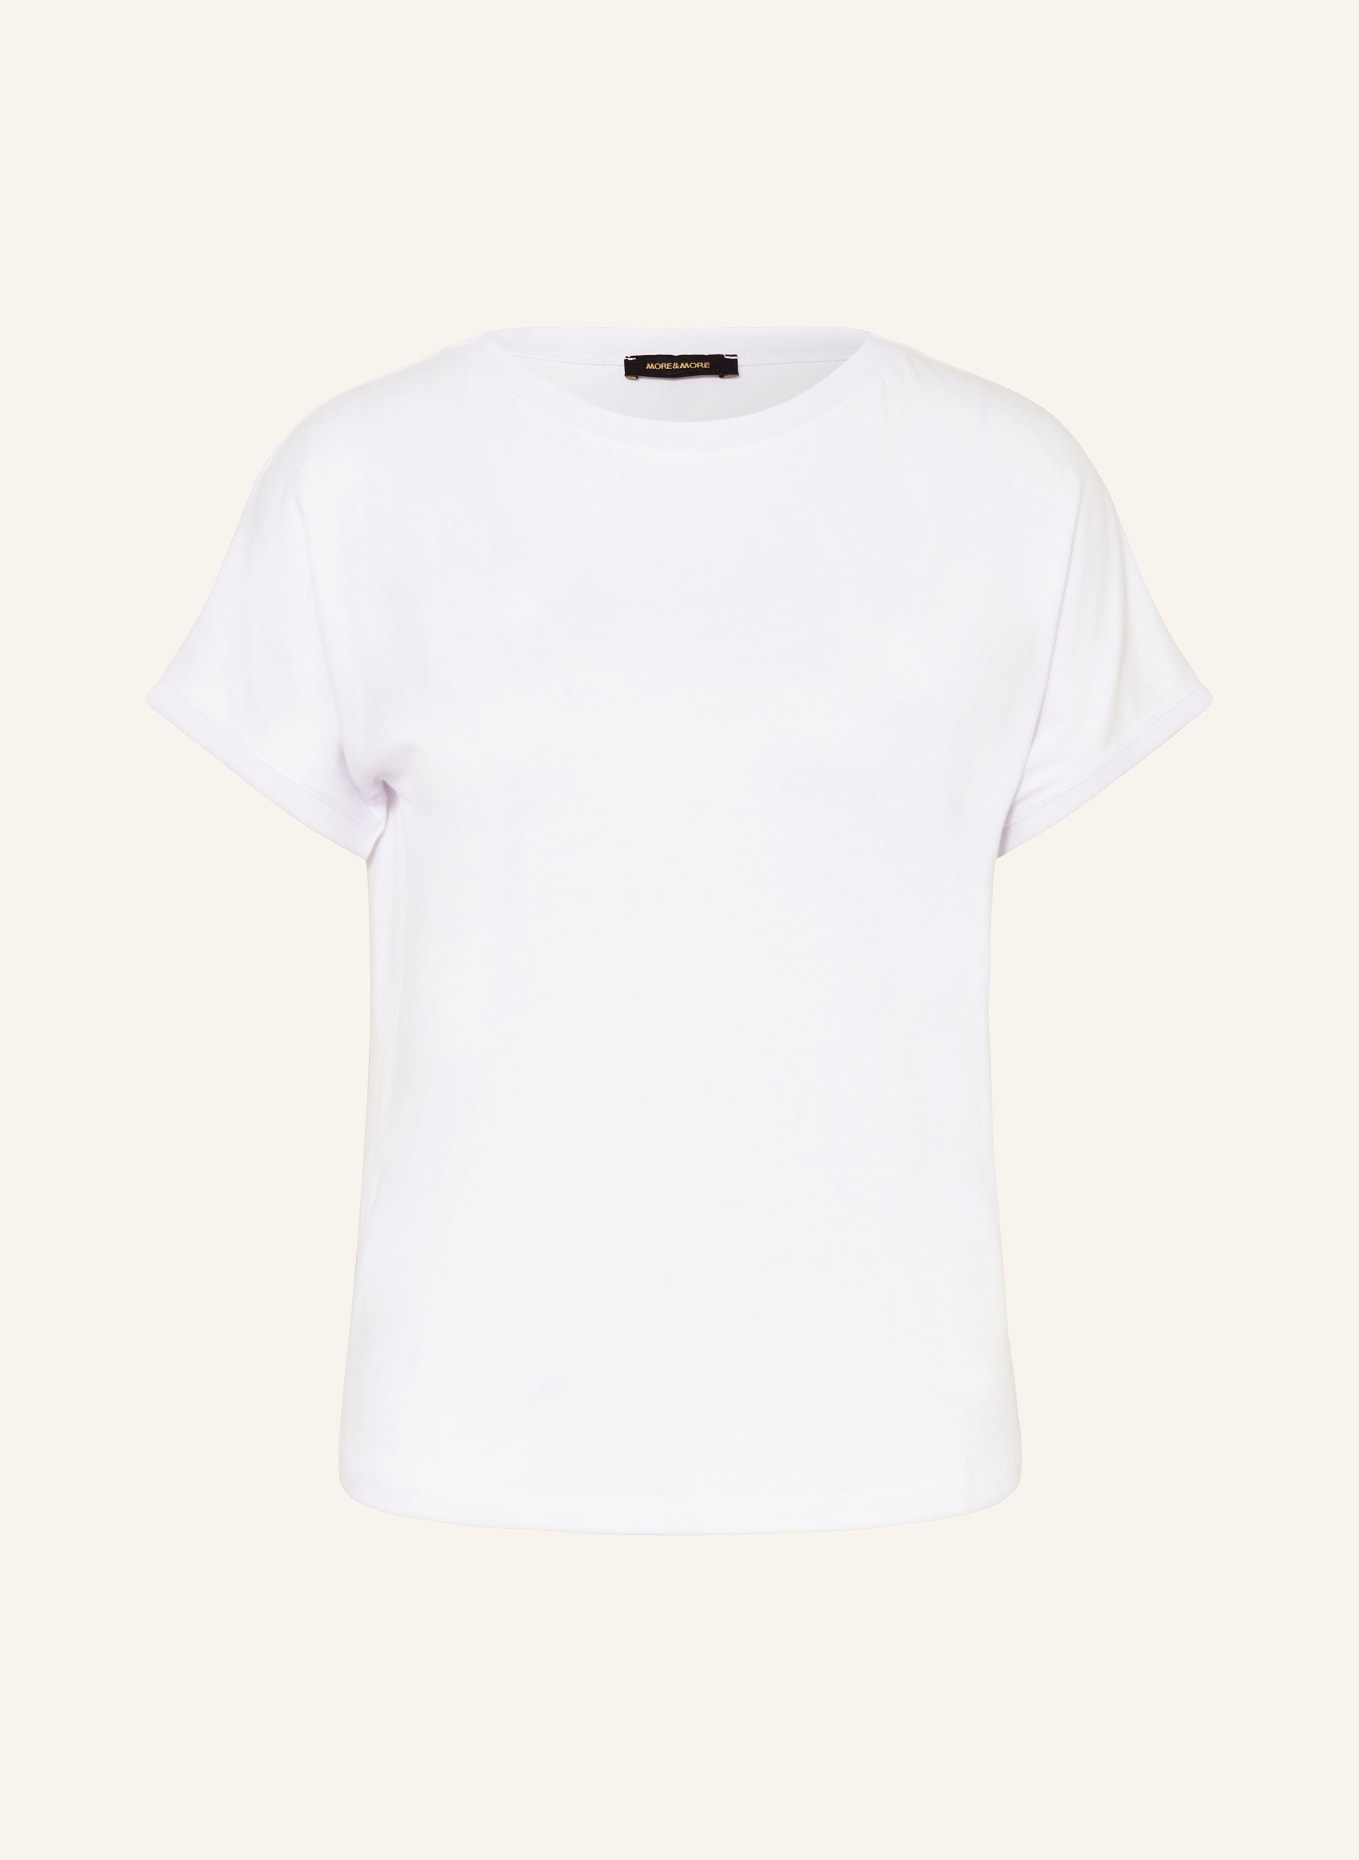 MORE & MORE T-shirt, Color: WHITE (Image 1)